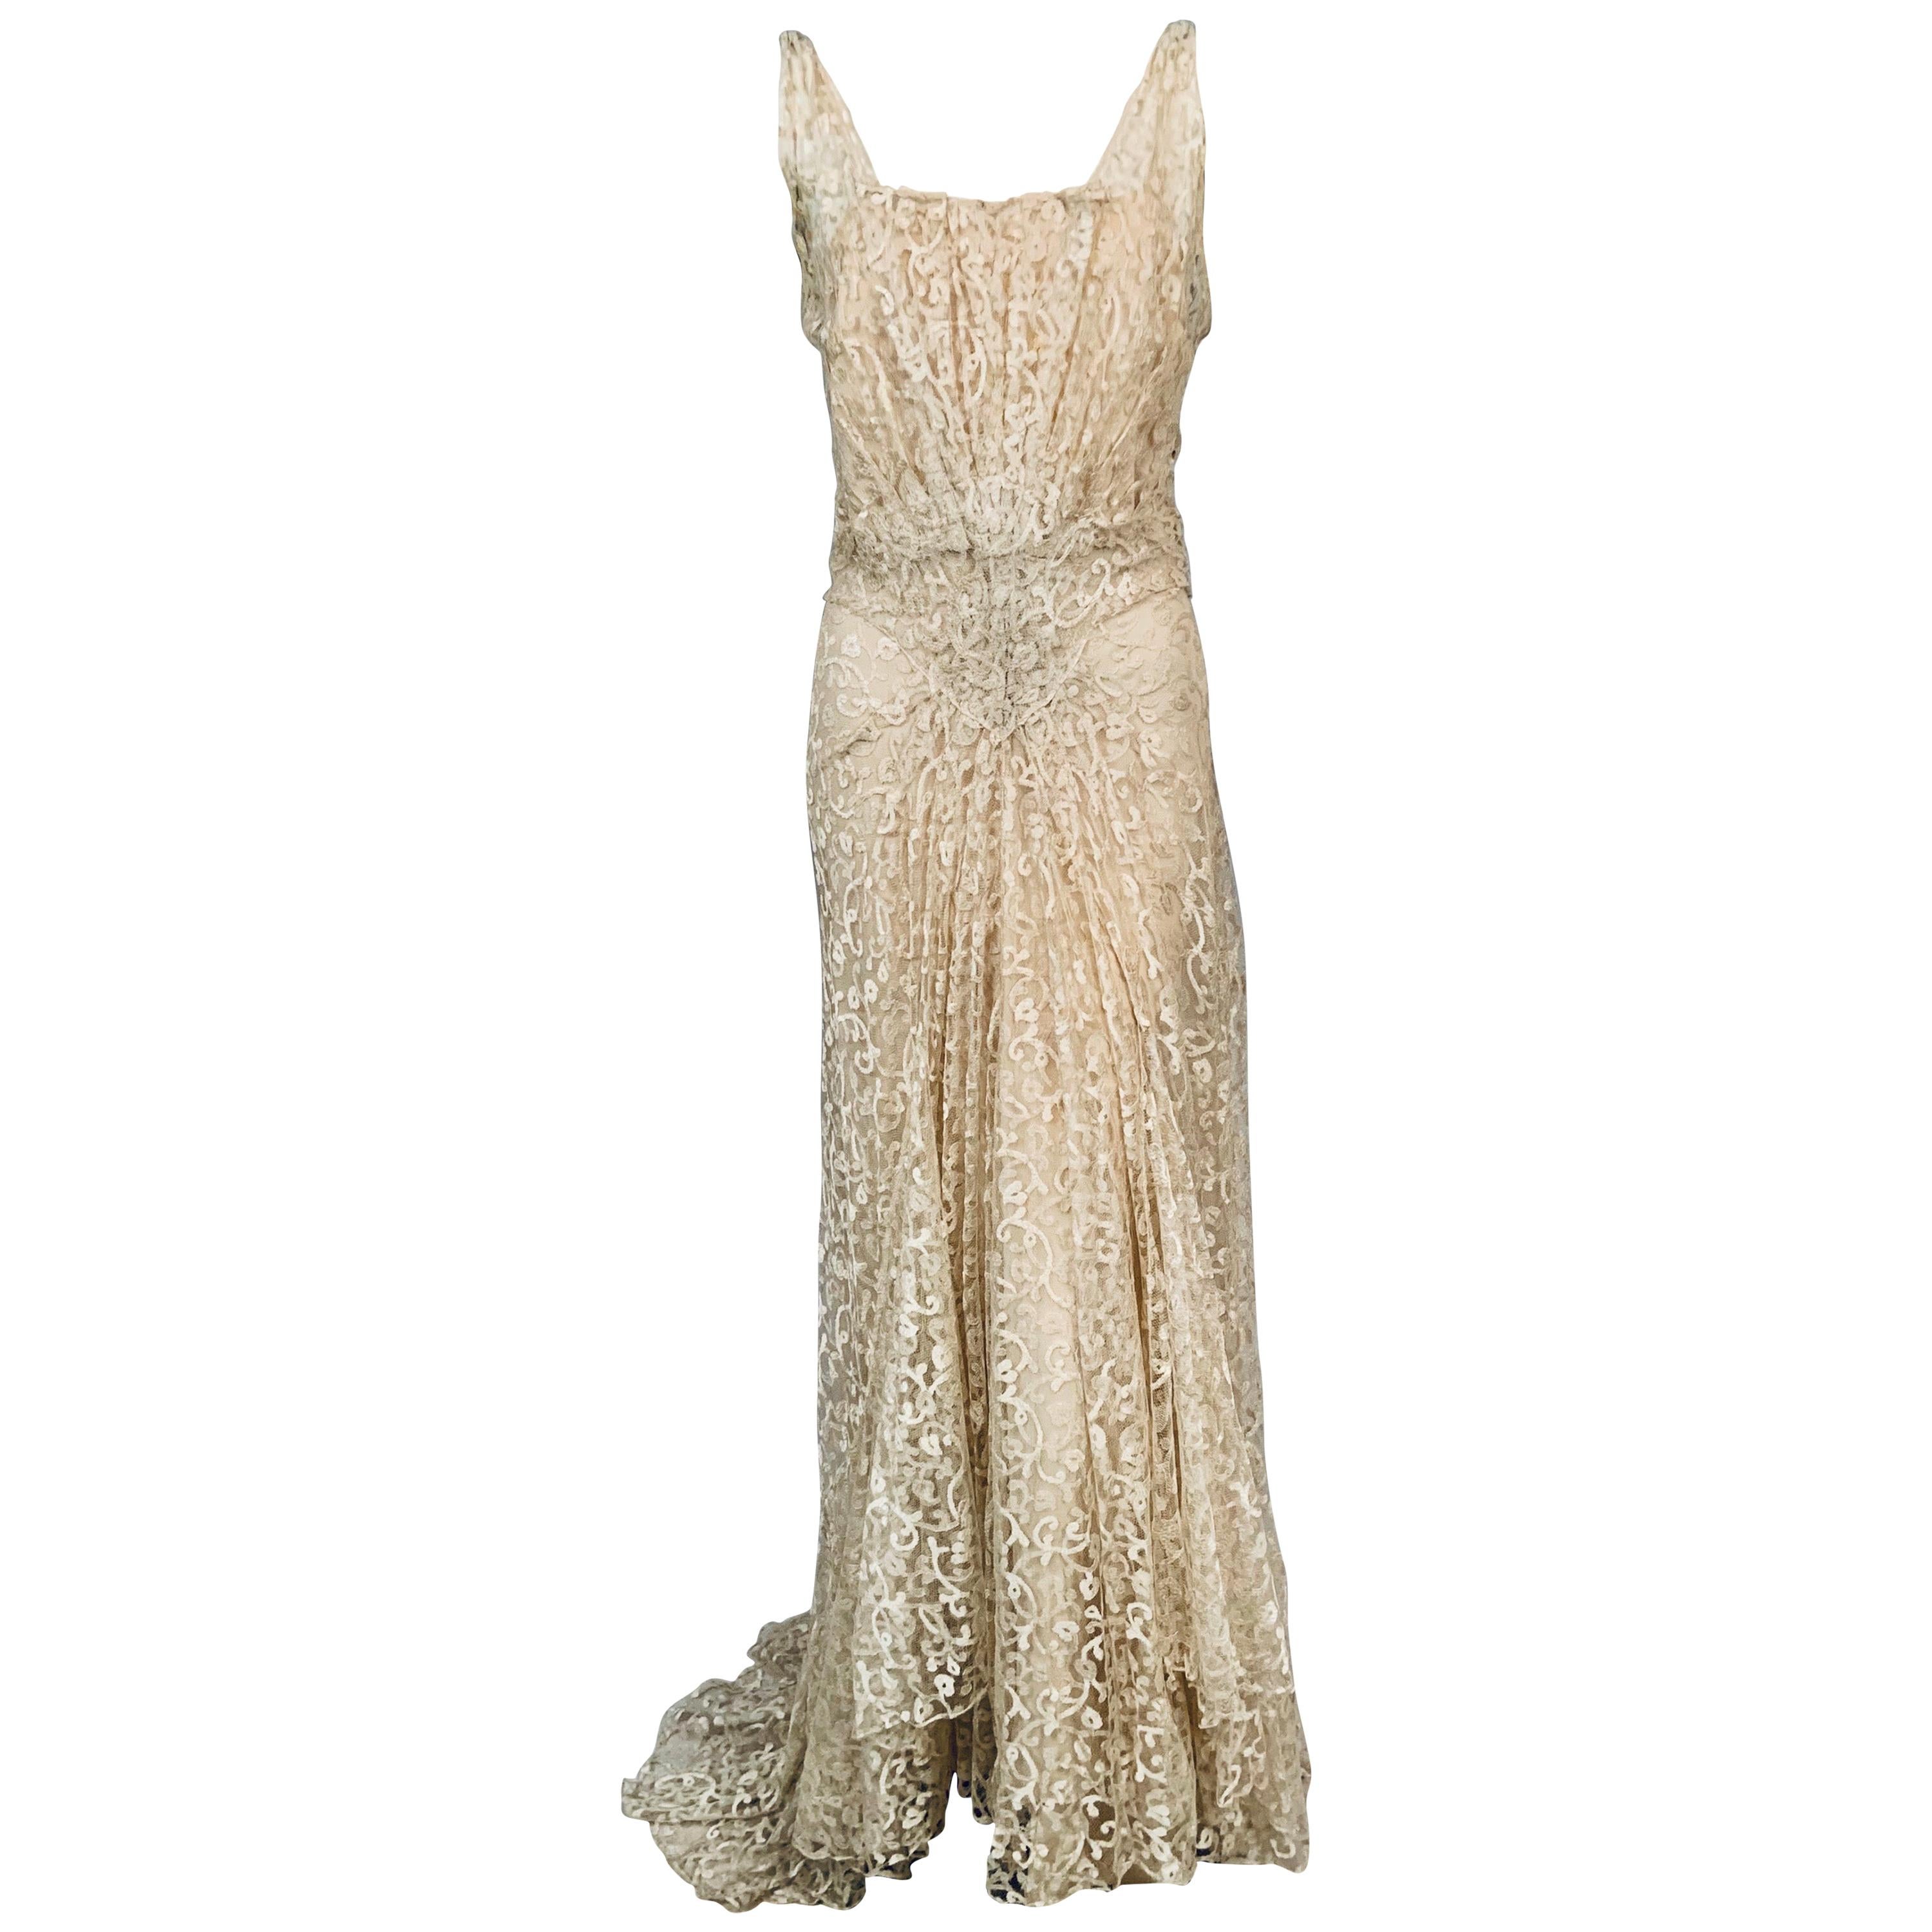 French 1930' Ivory Lace Bias Cut Evening Gown and Chiffon Slip by Bialo, Paris